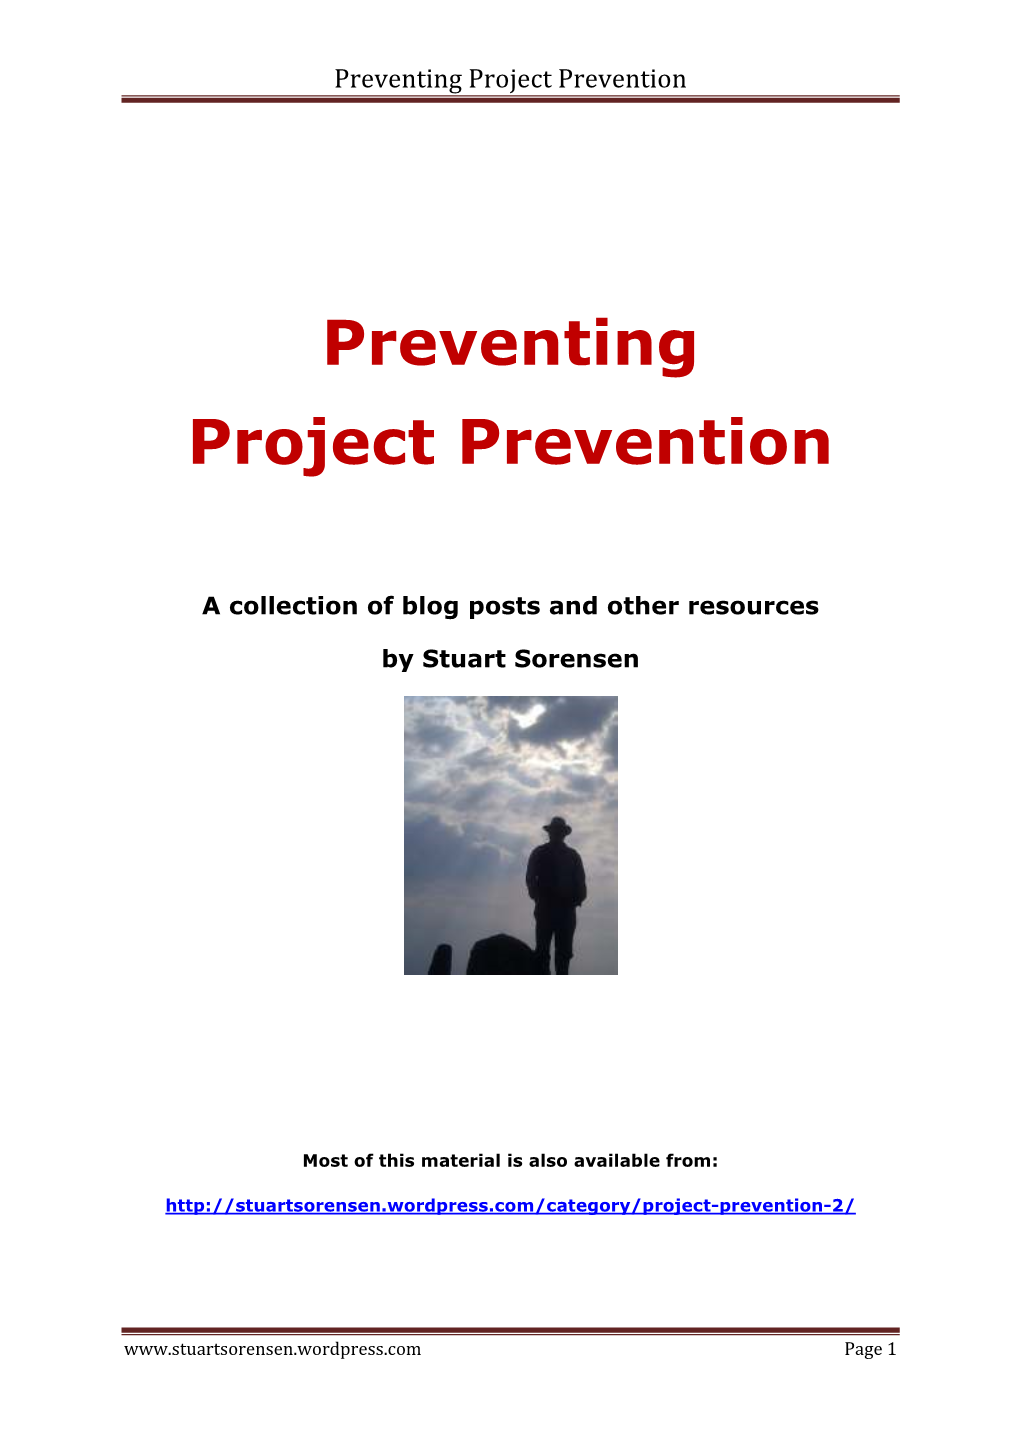 Preventing Project Prevention